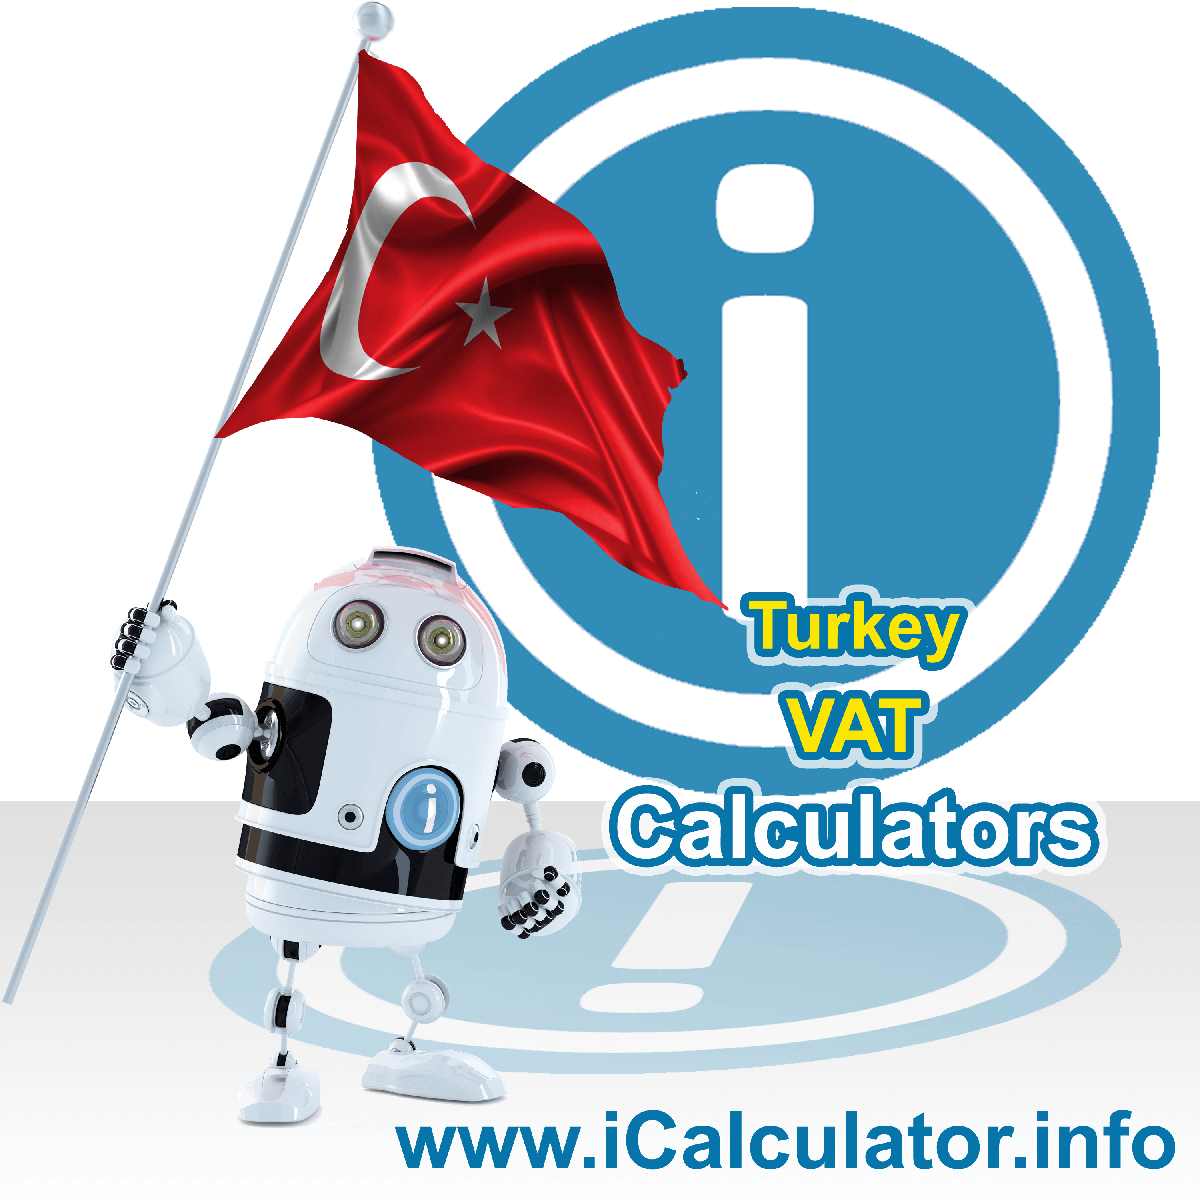 Turkey VAT Calculator. This image shows the Turkey flag and information relating to the VAT formula used for calculating Value Added Tax in Turkey using the Turkey VAT Calculator in 2023